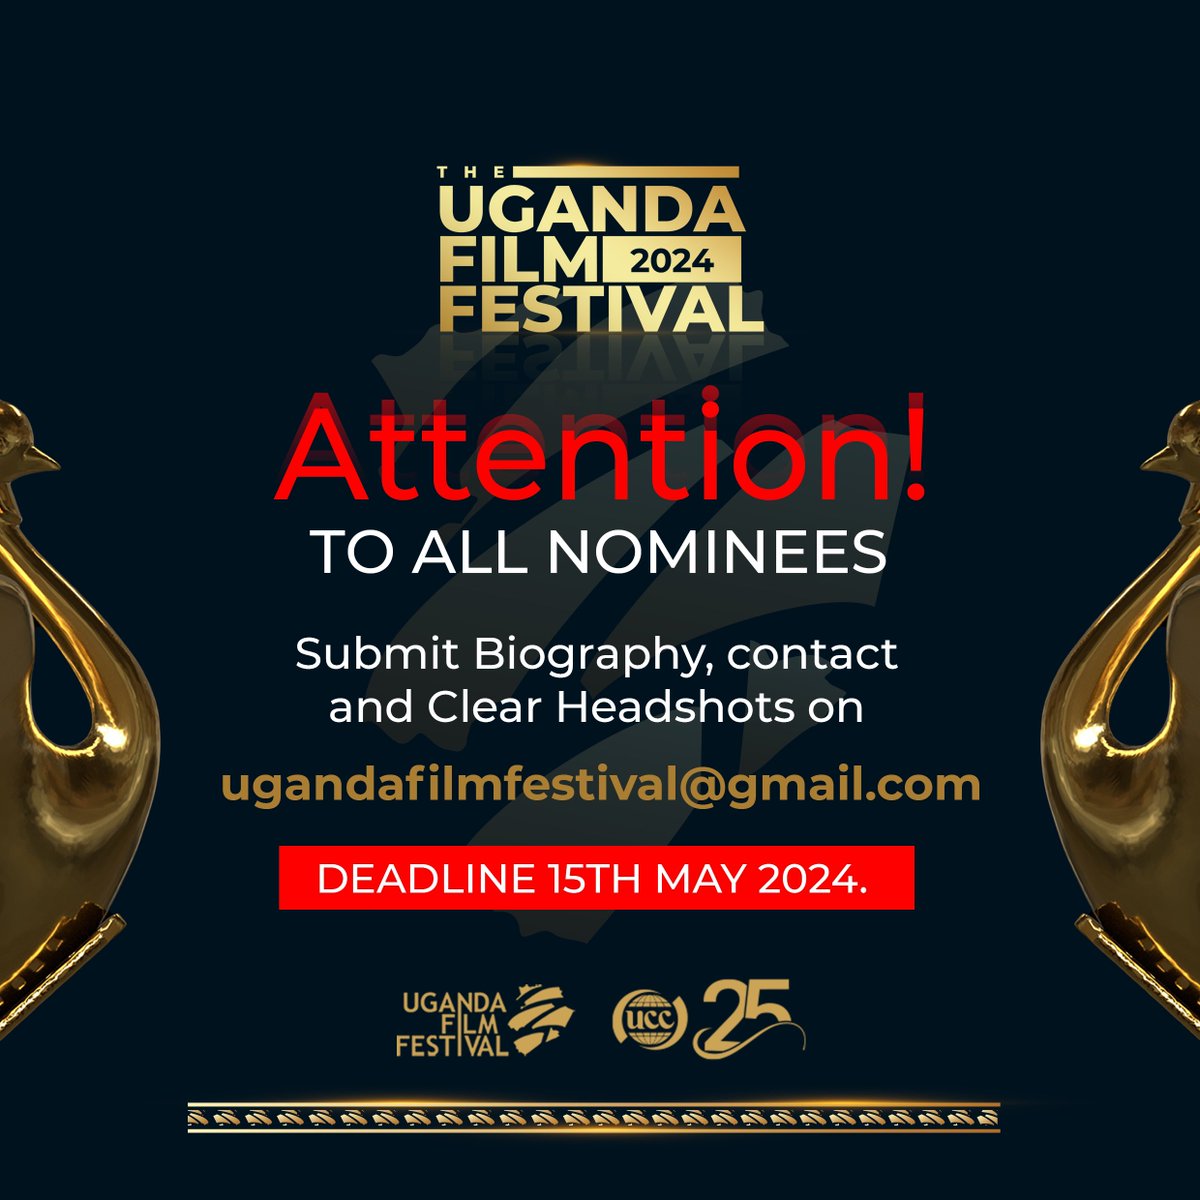 All nominees in #UFF2024 should submit their biography, contact information and clear headshots. #LocalStoriesGlobalimpact